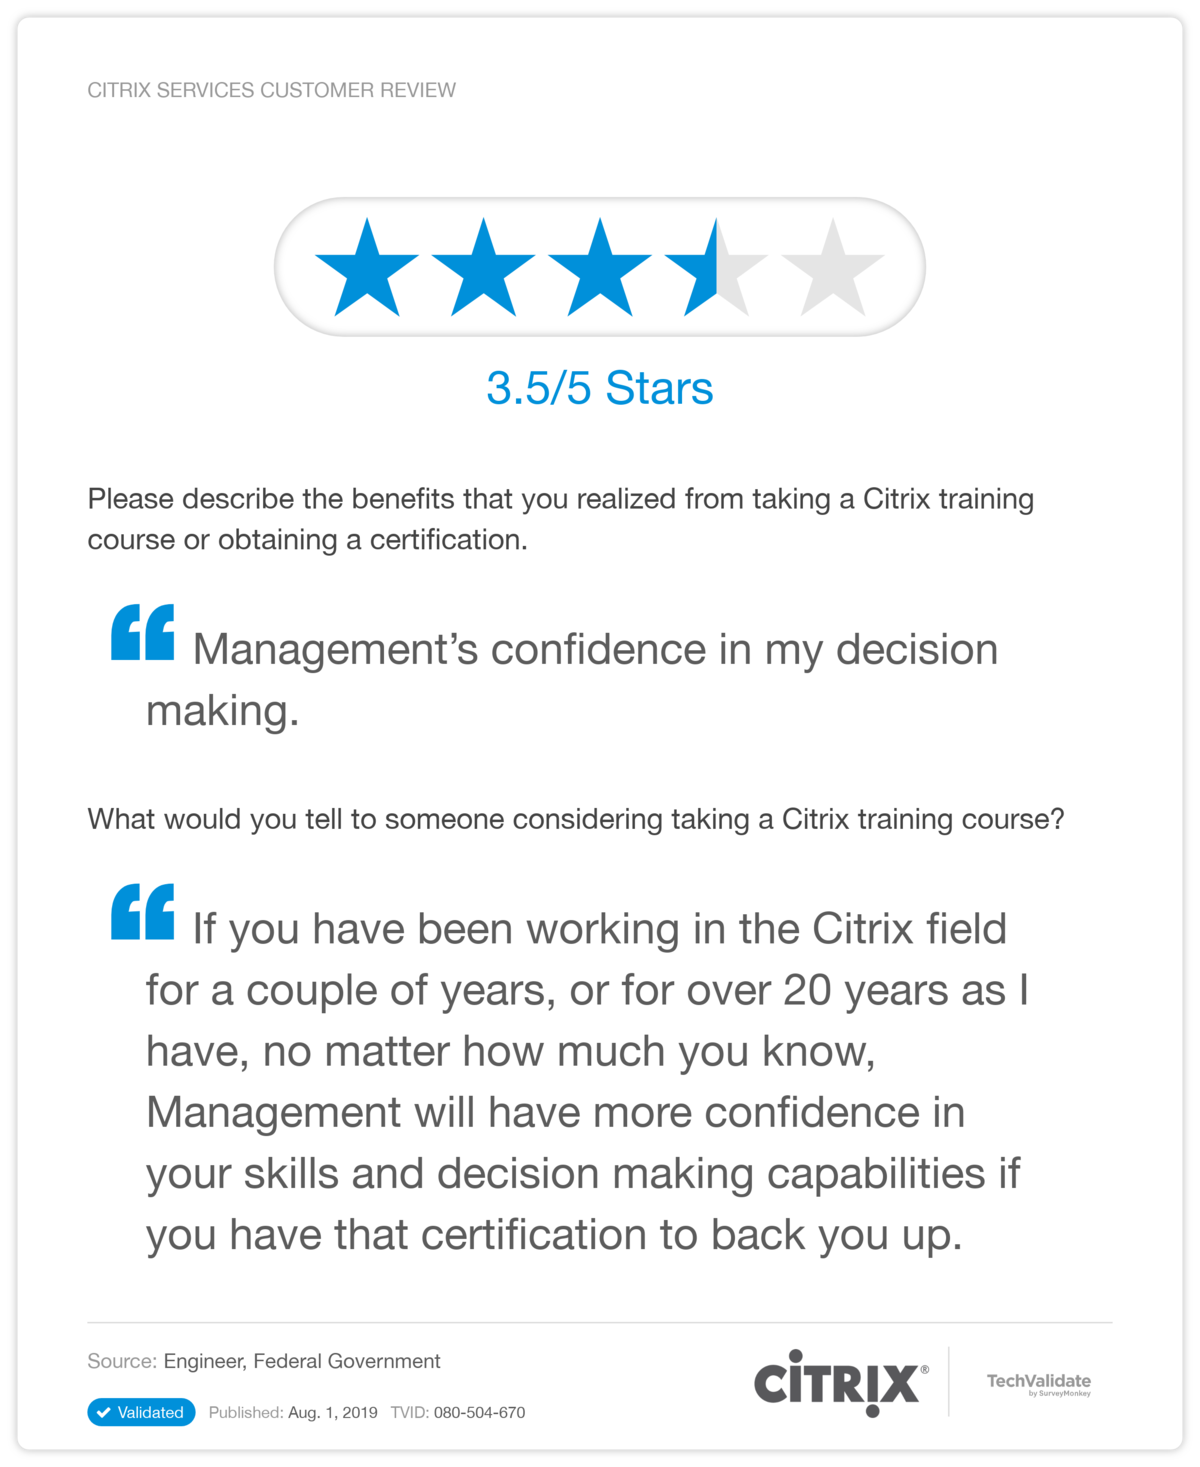 Citrix Services Customer Review